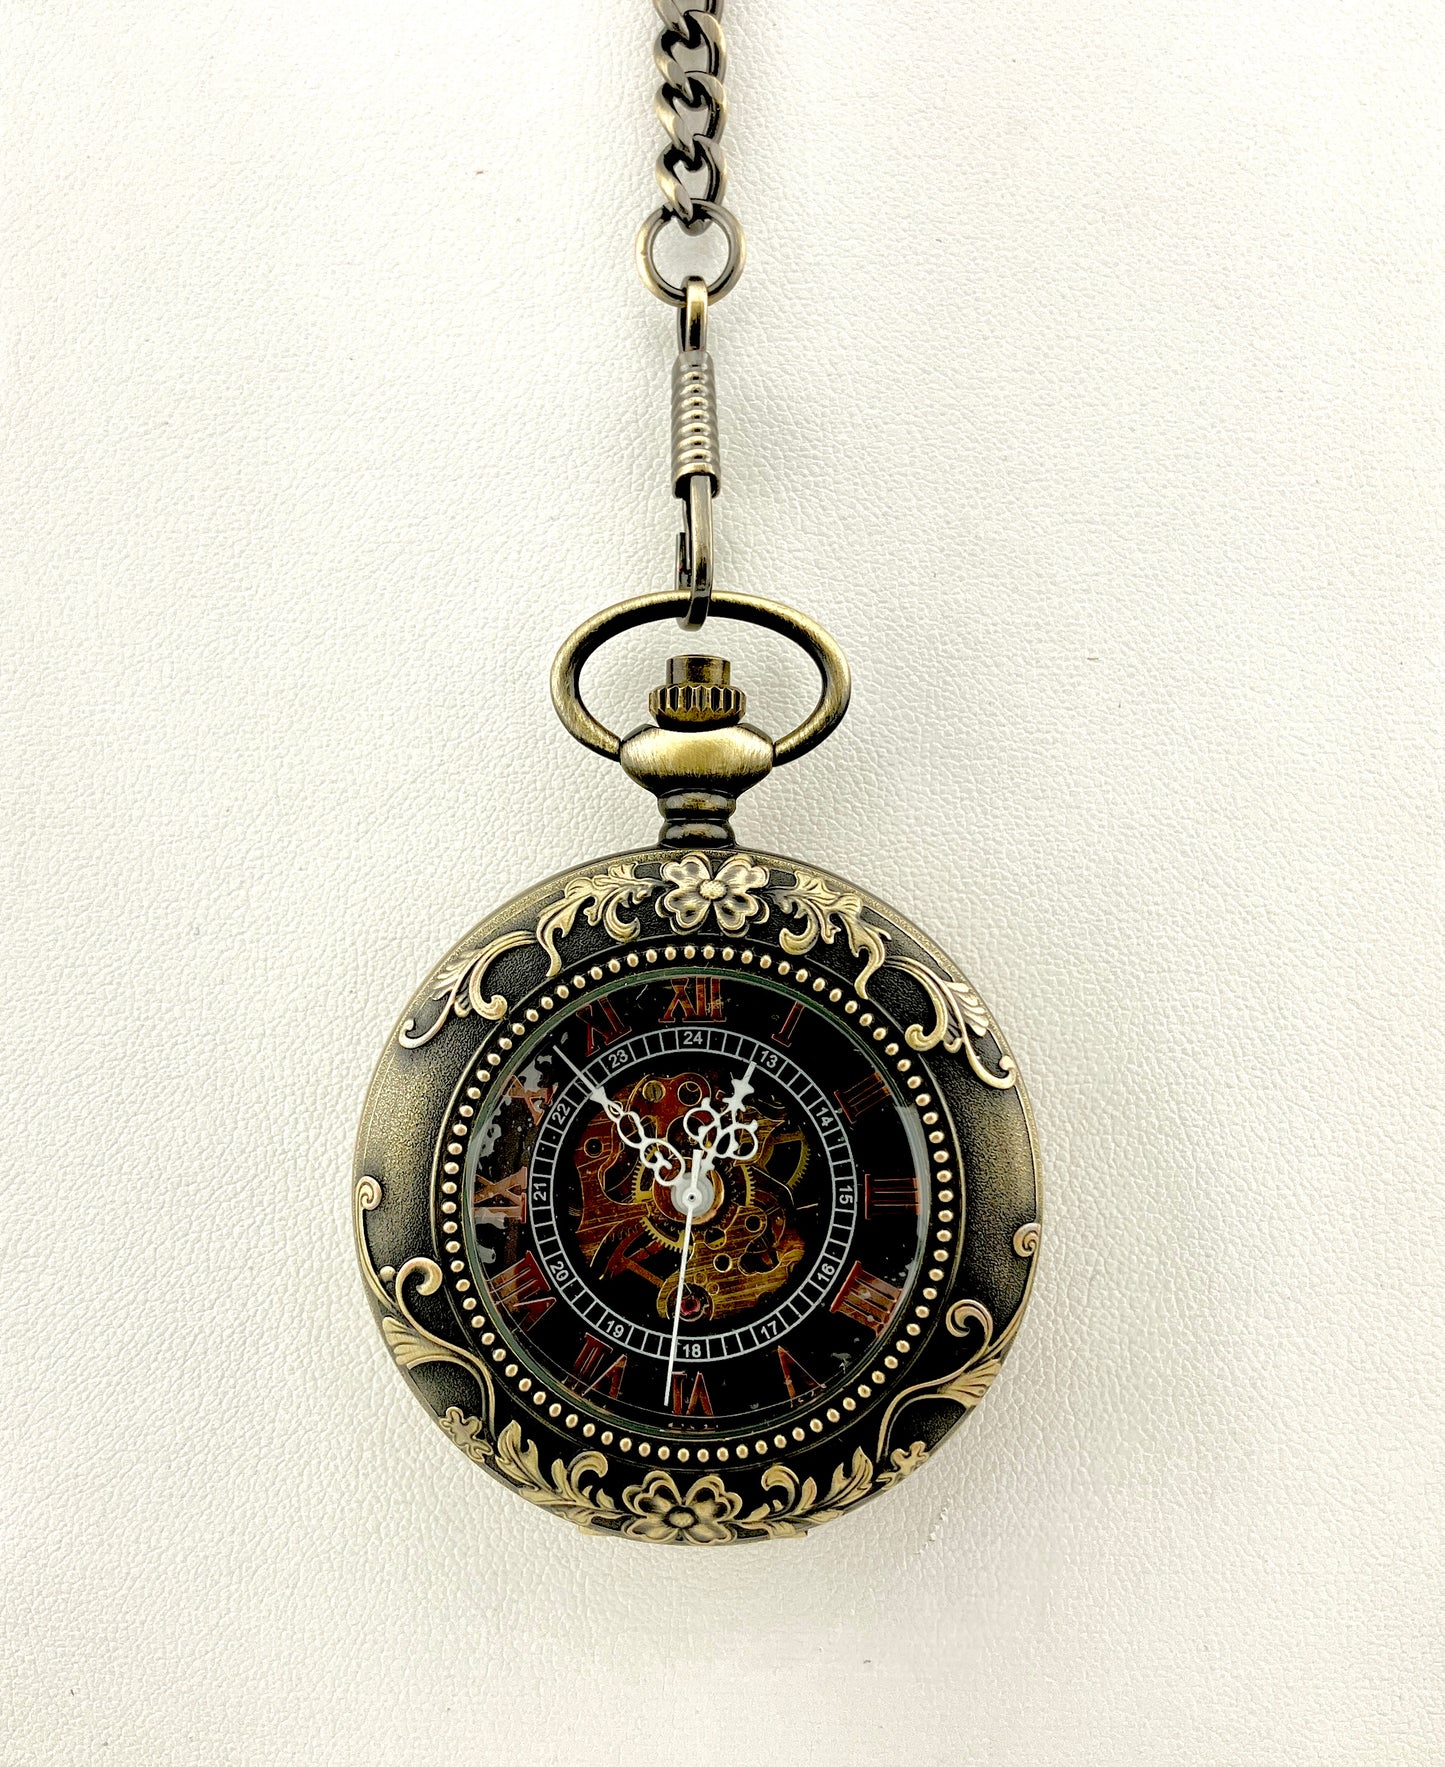 Winding Pocket Watch Non-Vintage Embossed Bronze with Hinged Cover